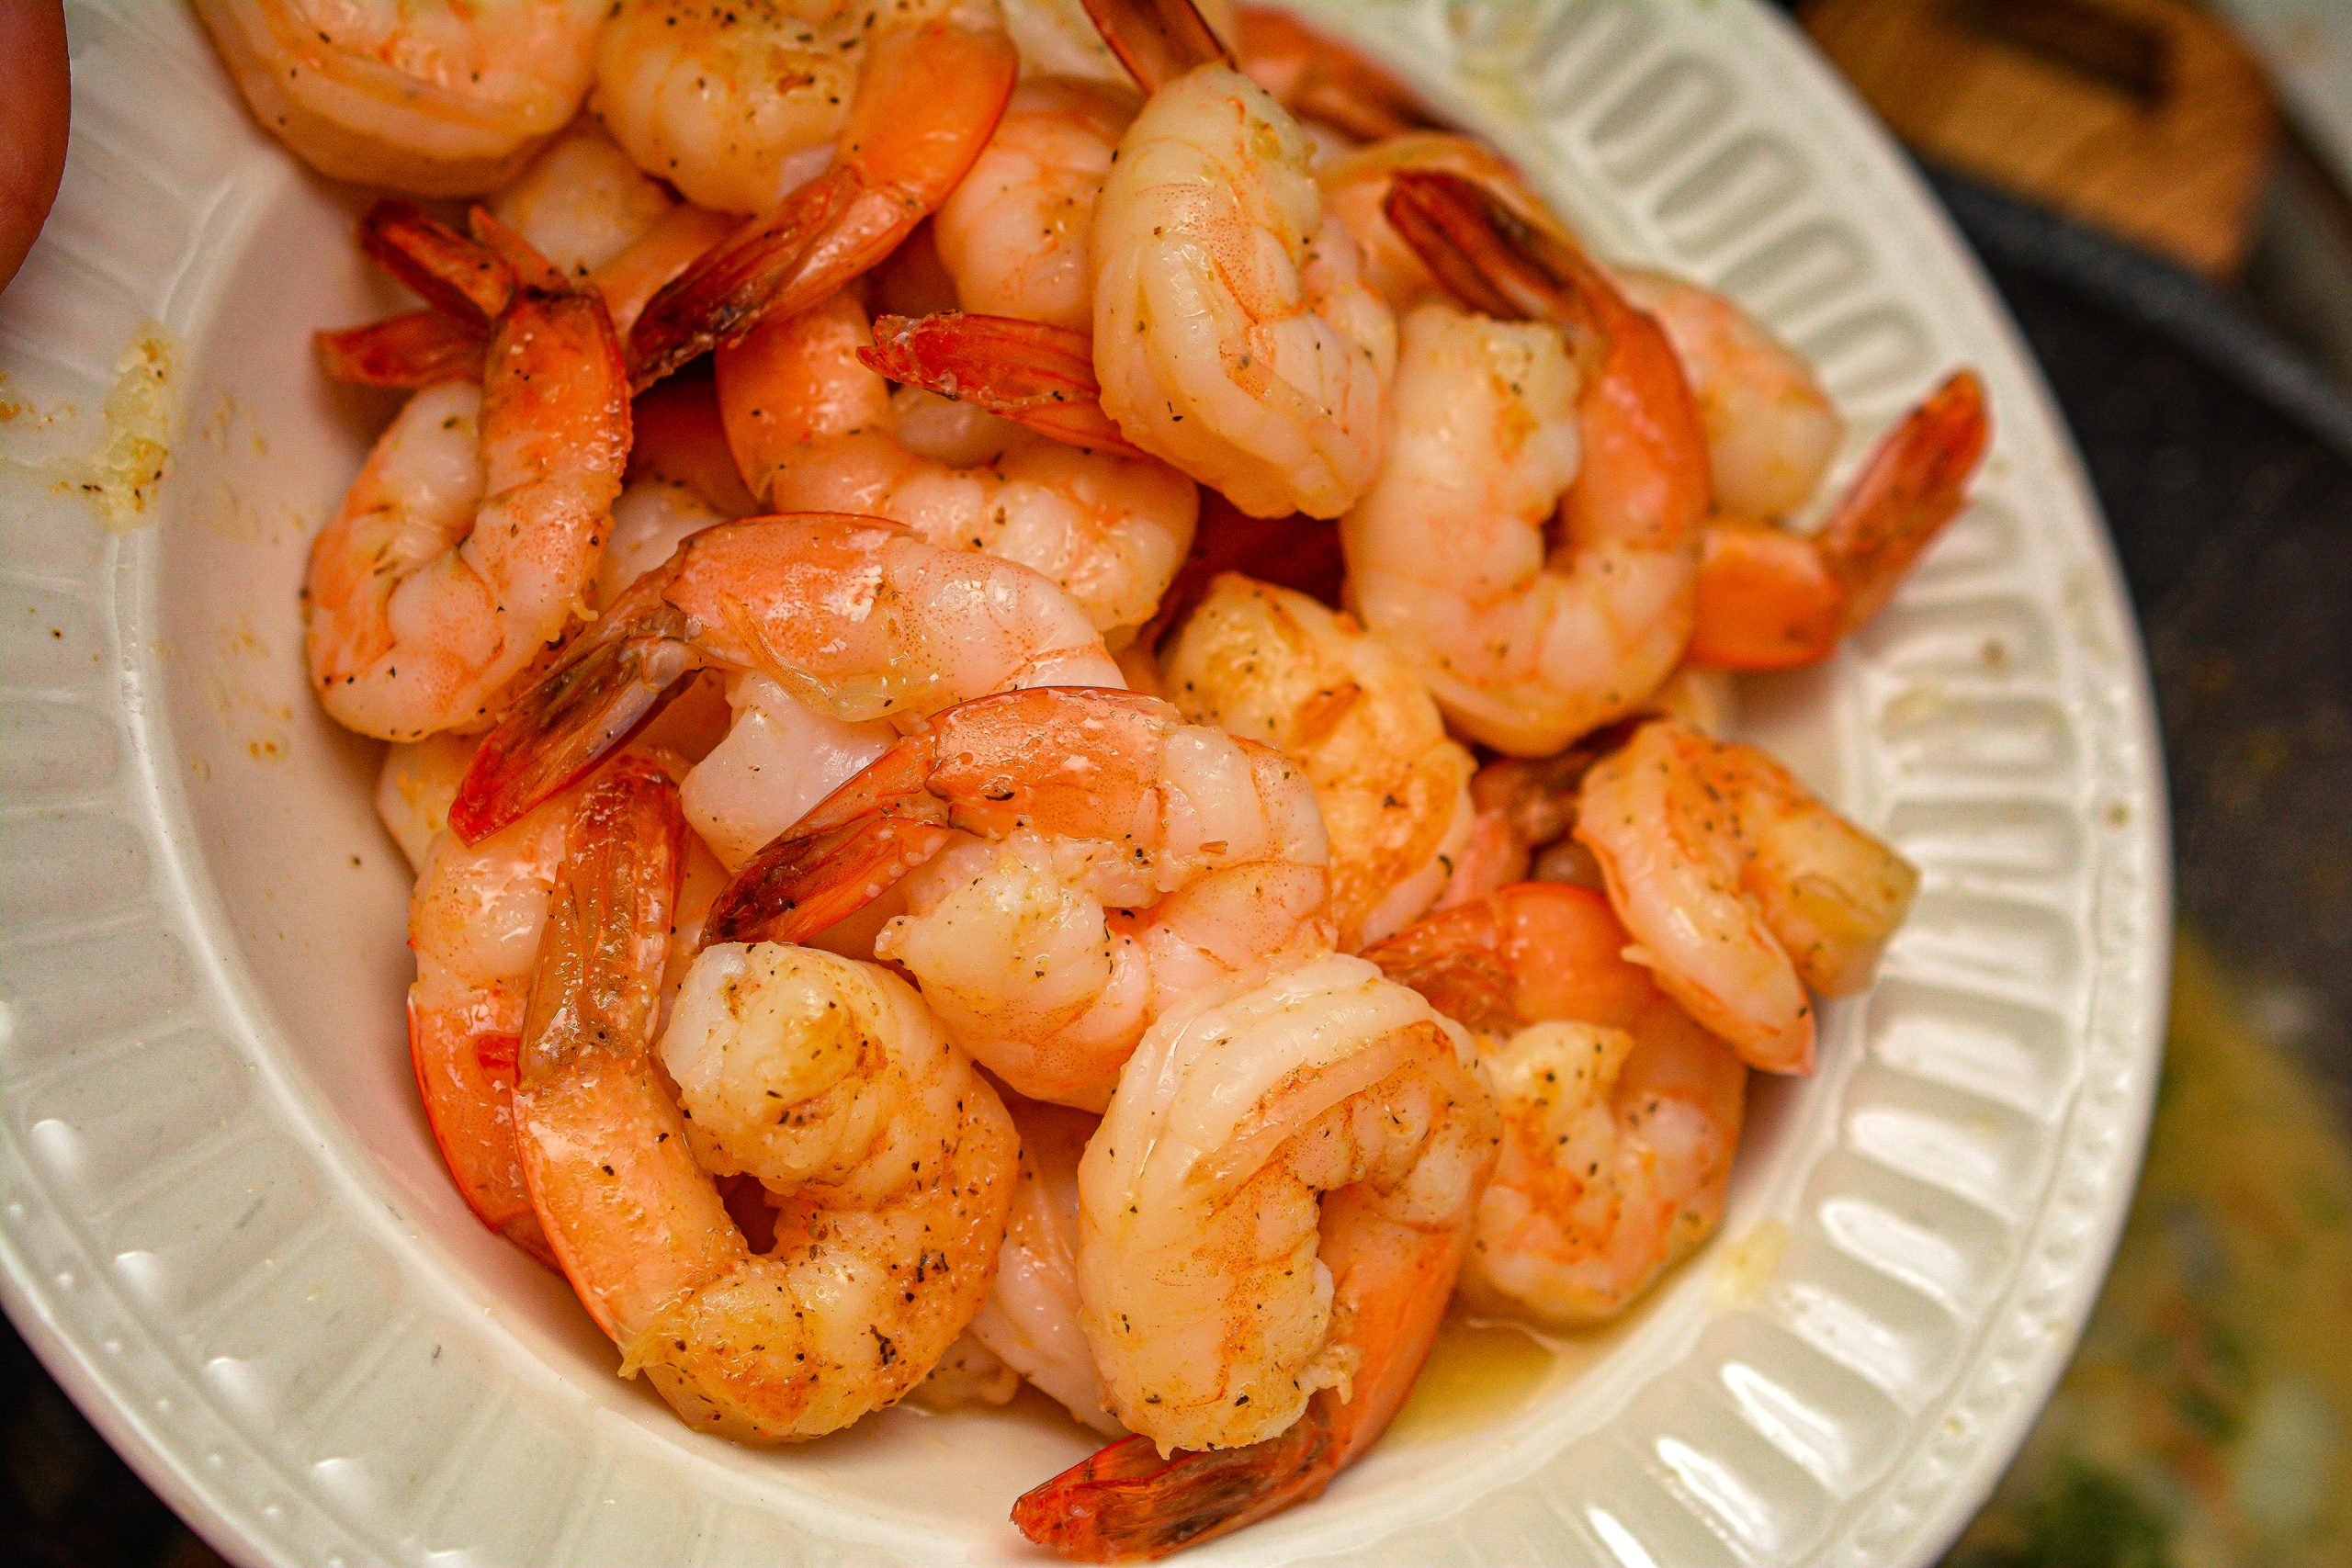 Add the shrimp back to the skillet and toss to coat well in the sauce before serving.